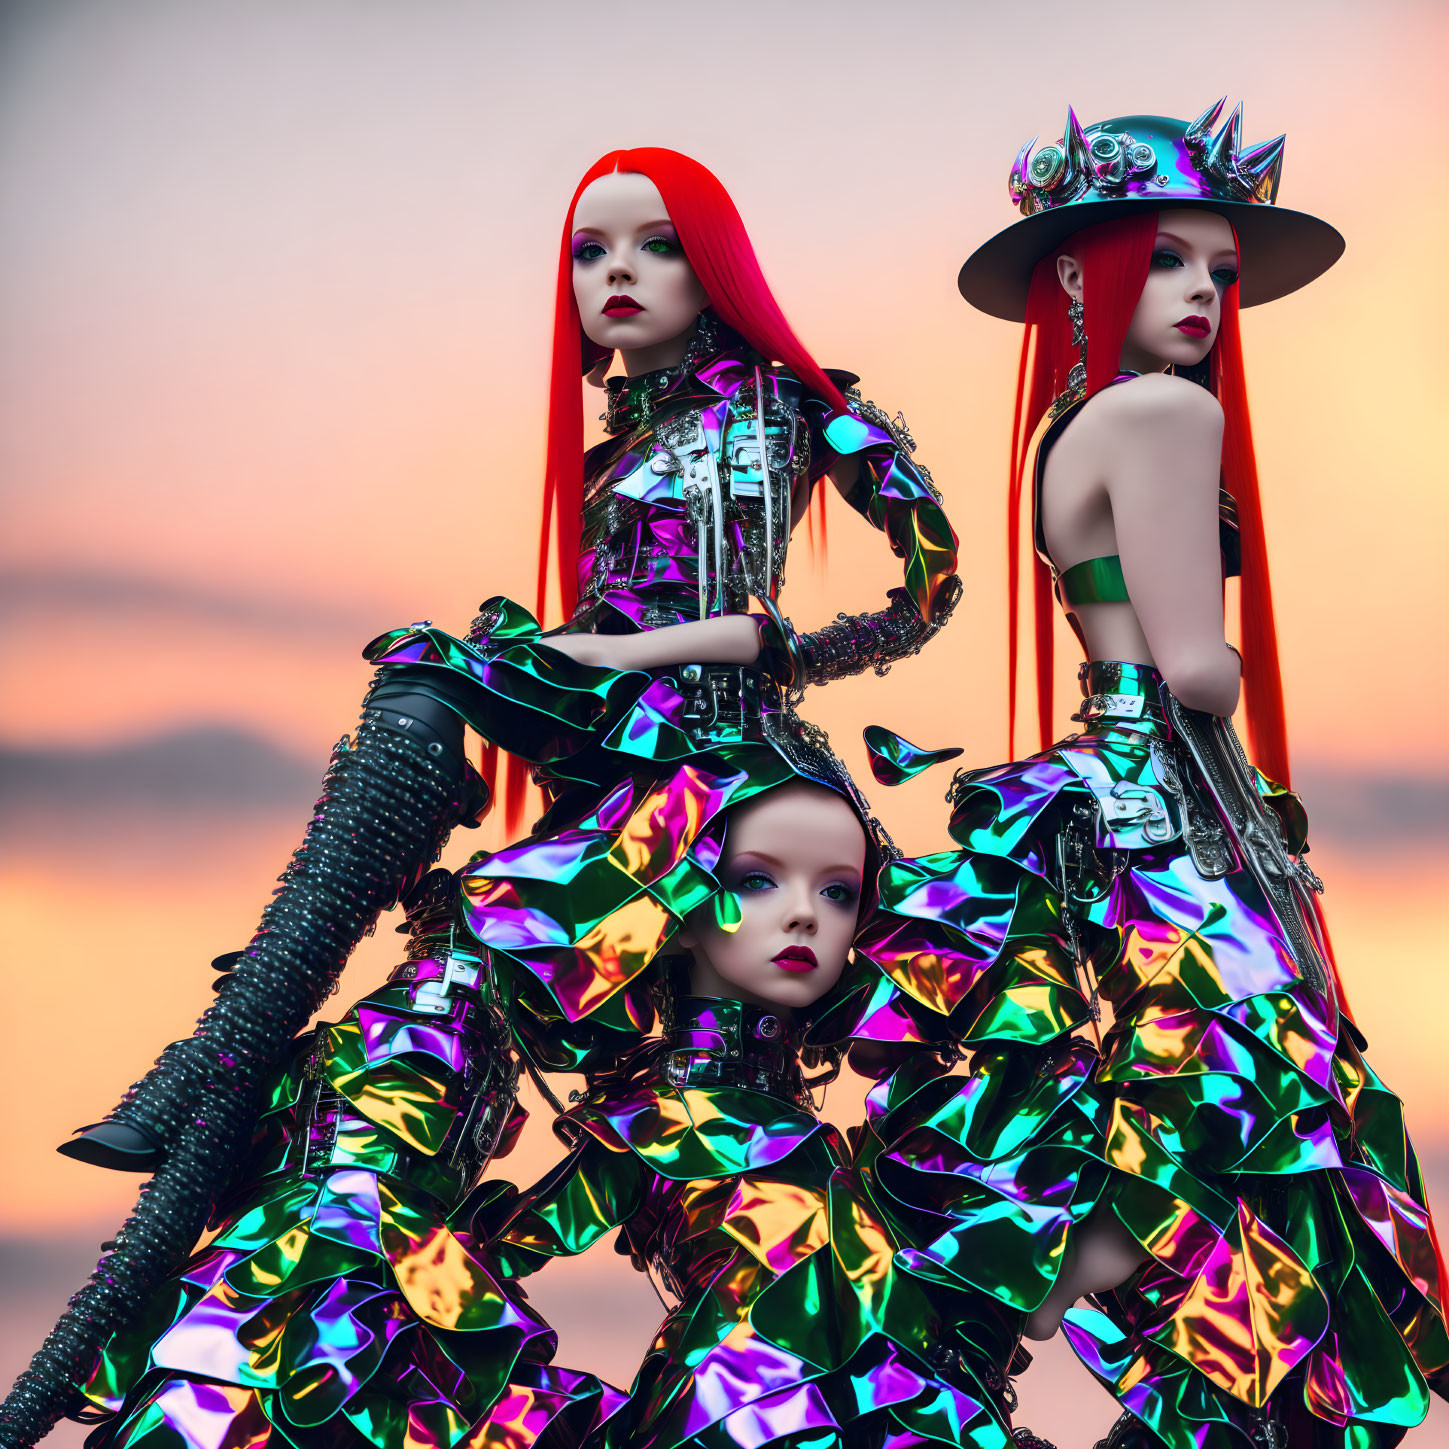 Vibrant red hair models in futuristic outfits at sunset